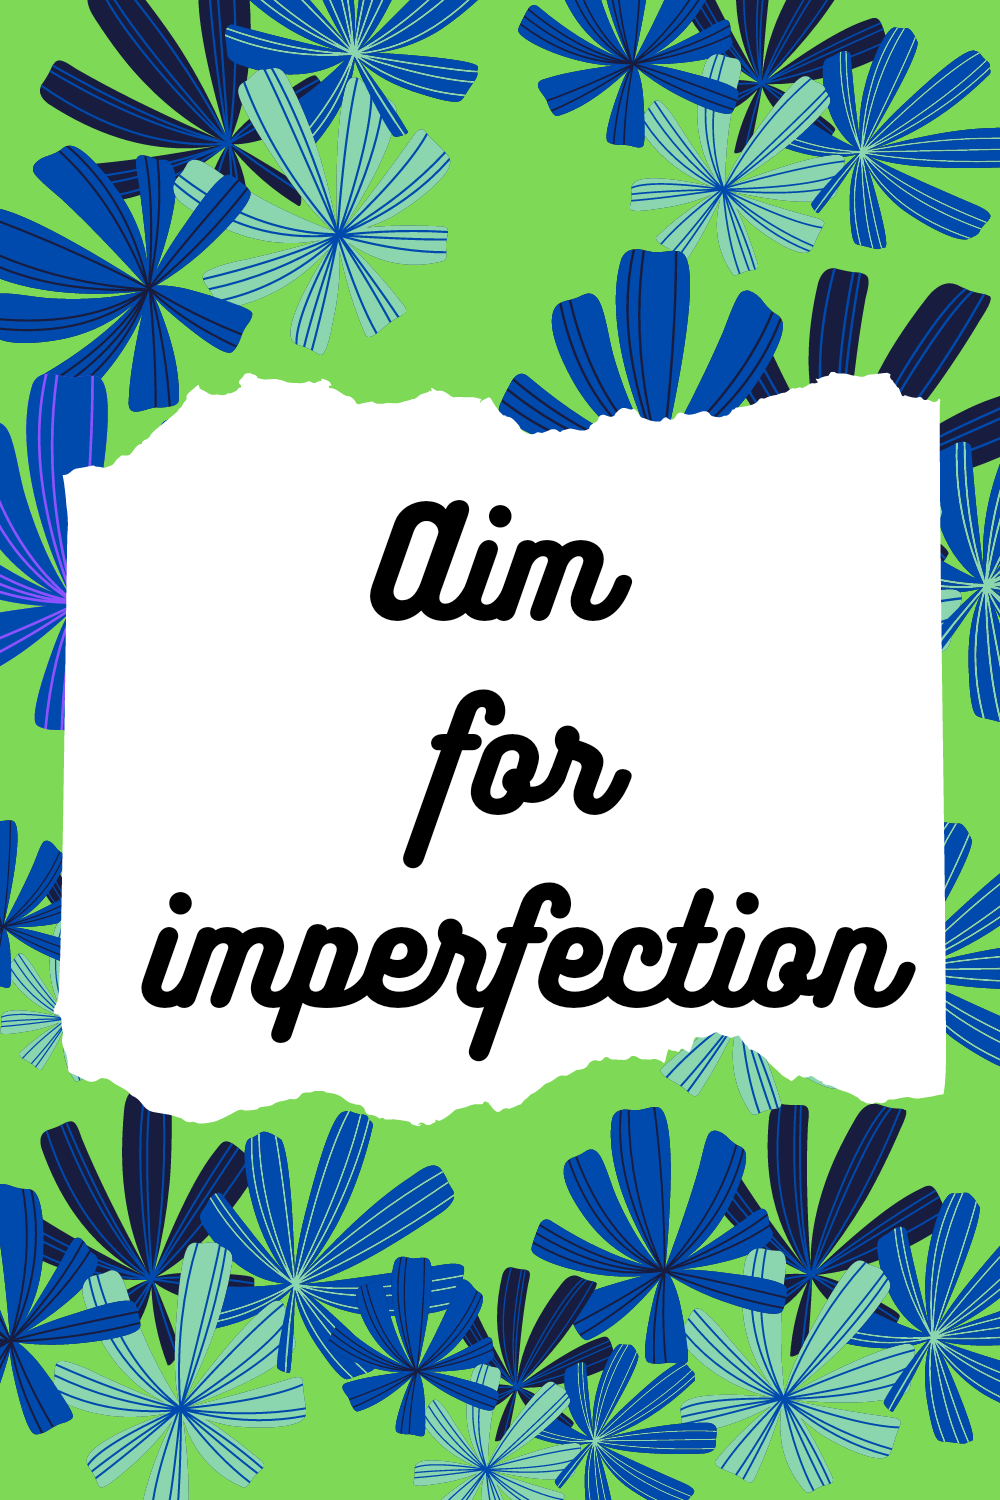 Aim for imperfection.